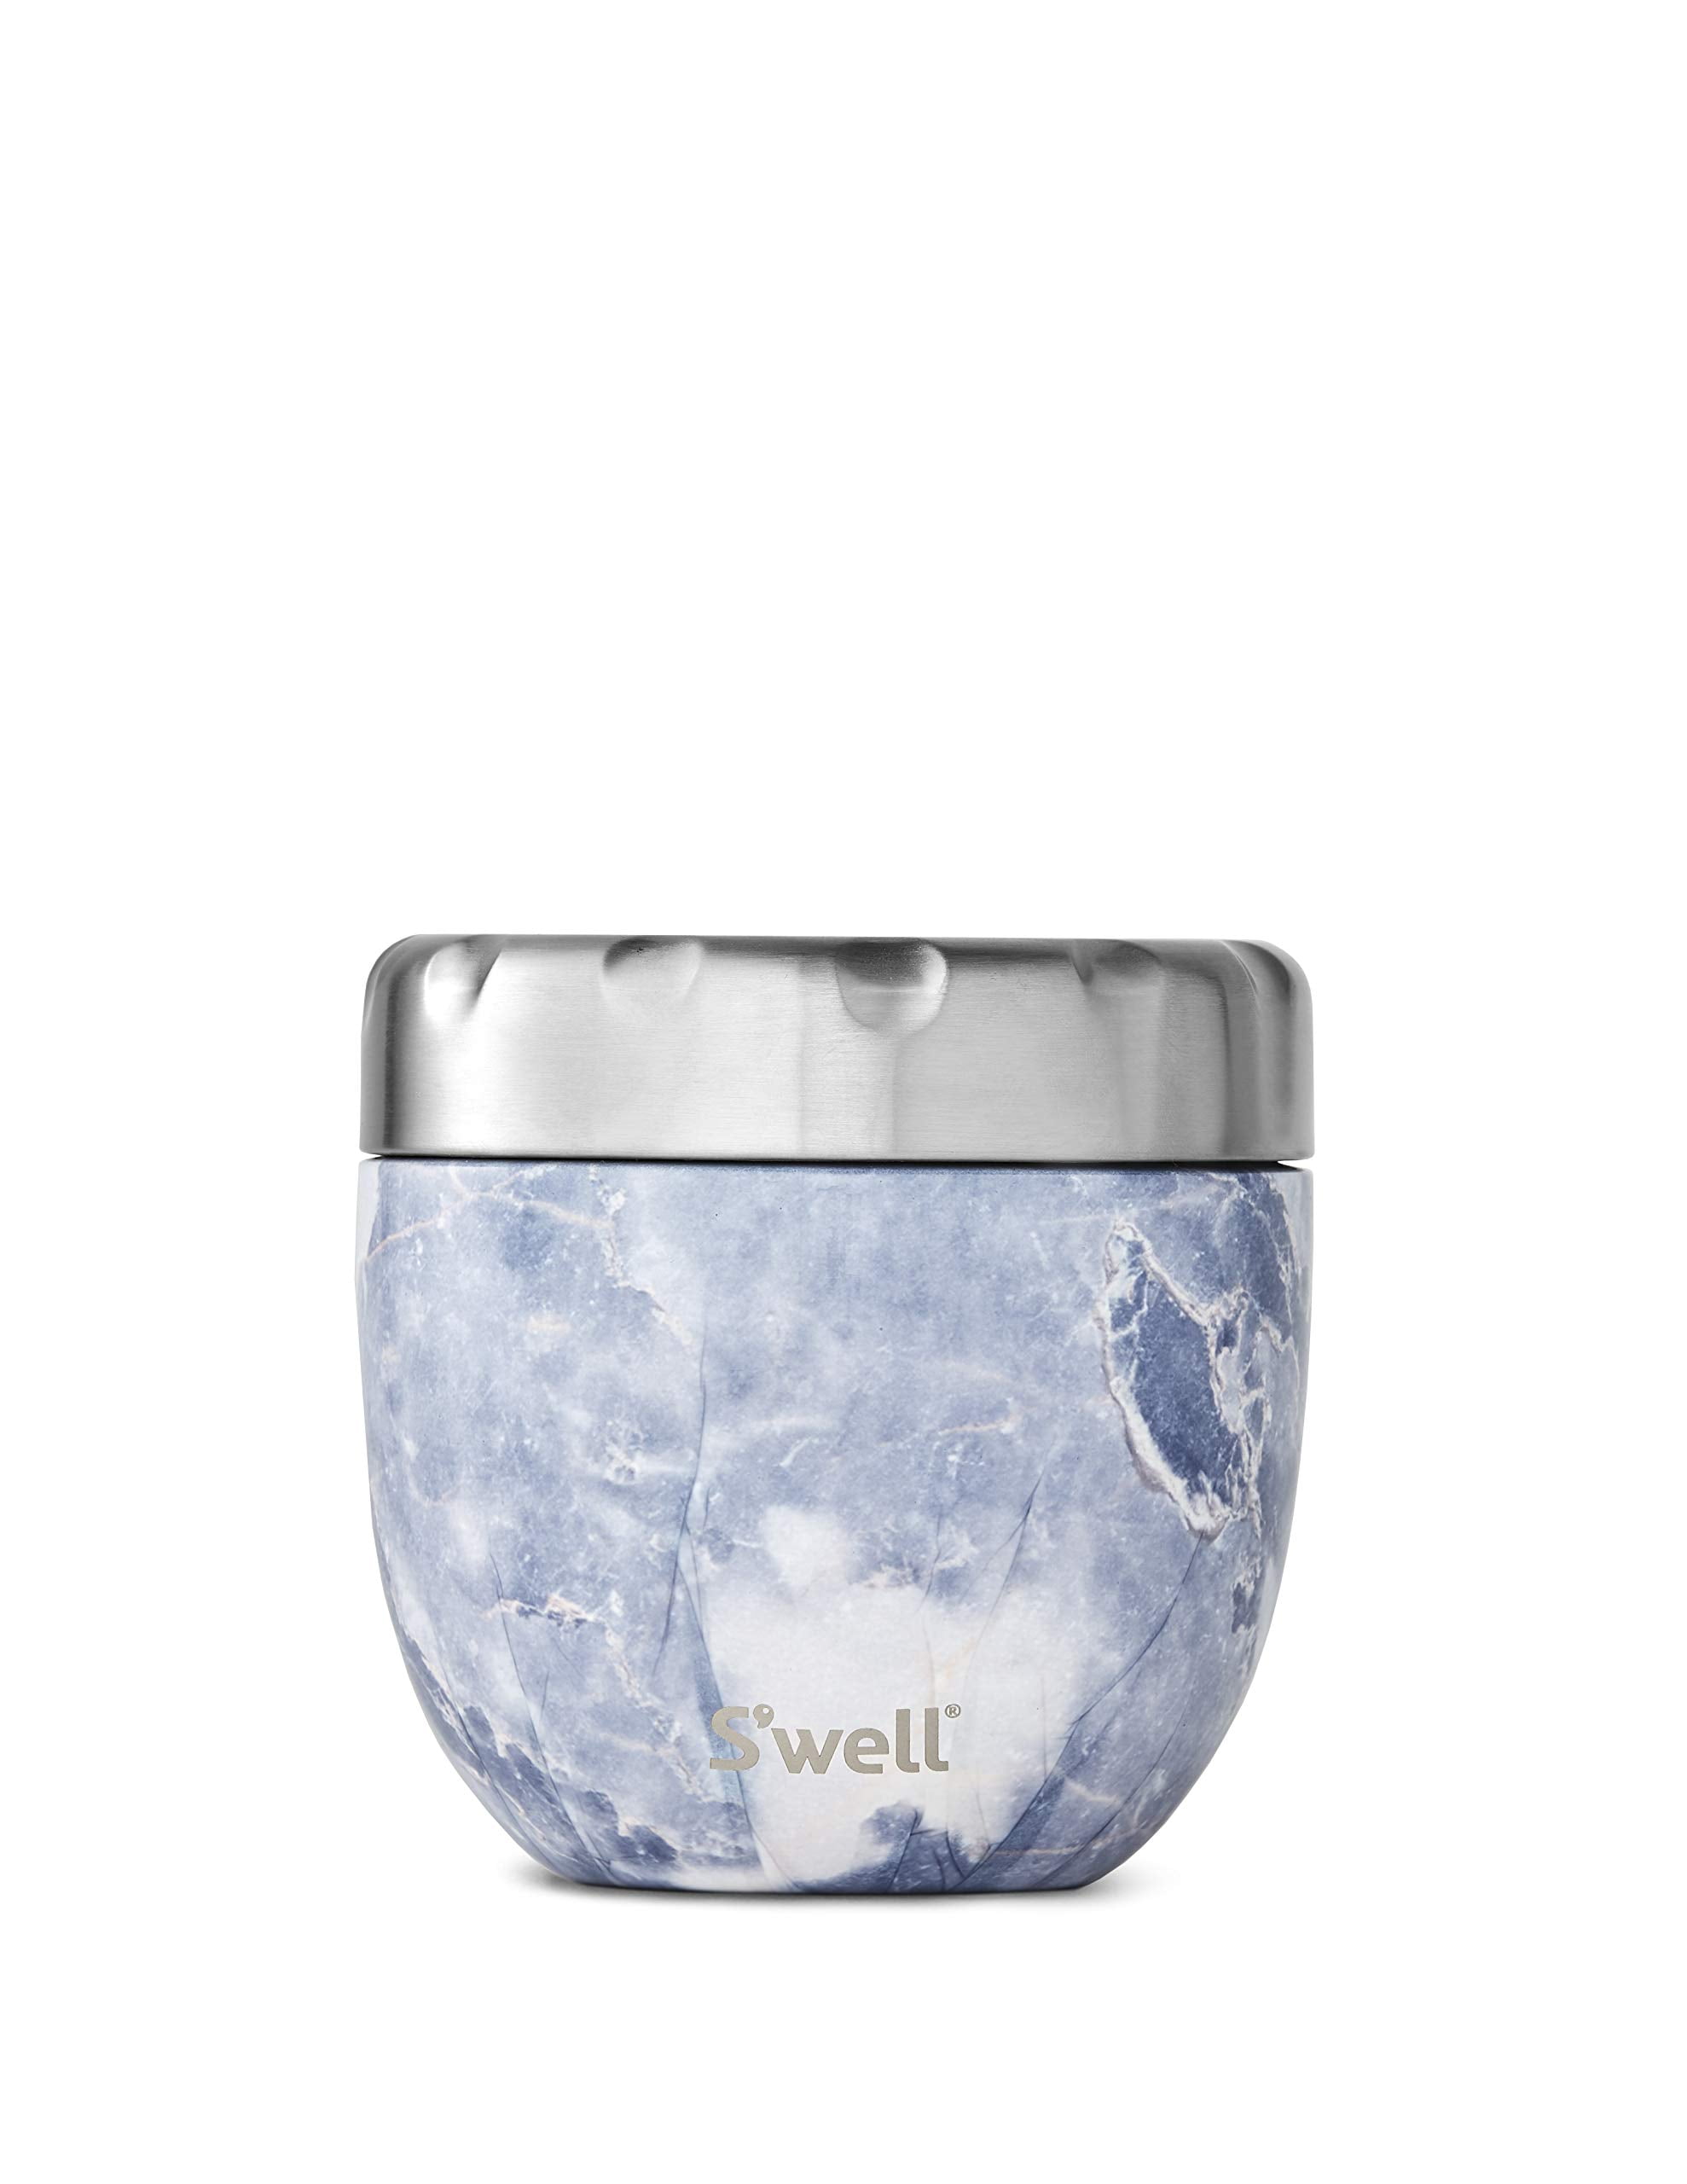 S'well 21.5 oz Insulated Food Container